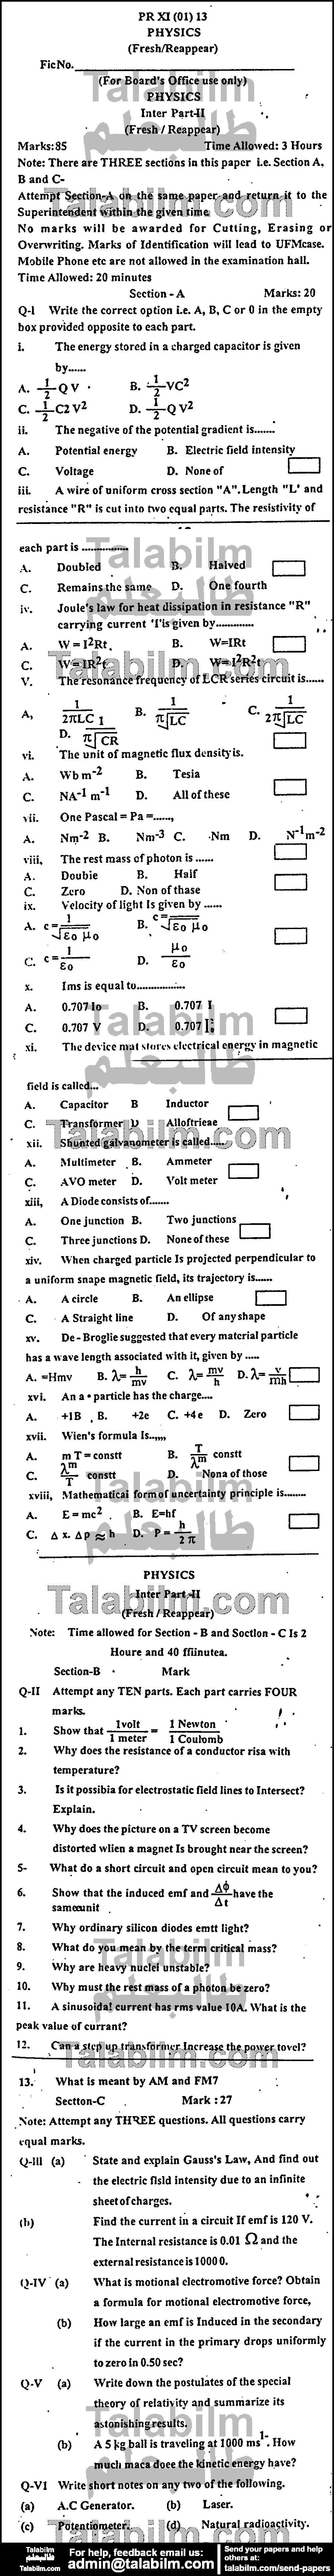 Physics 0 past paper for Group-I 2013